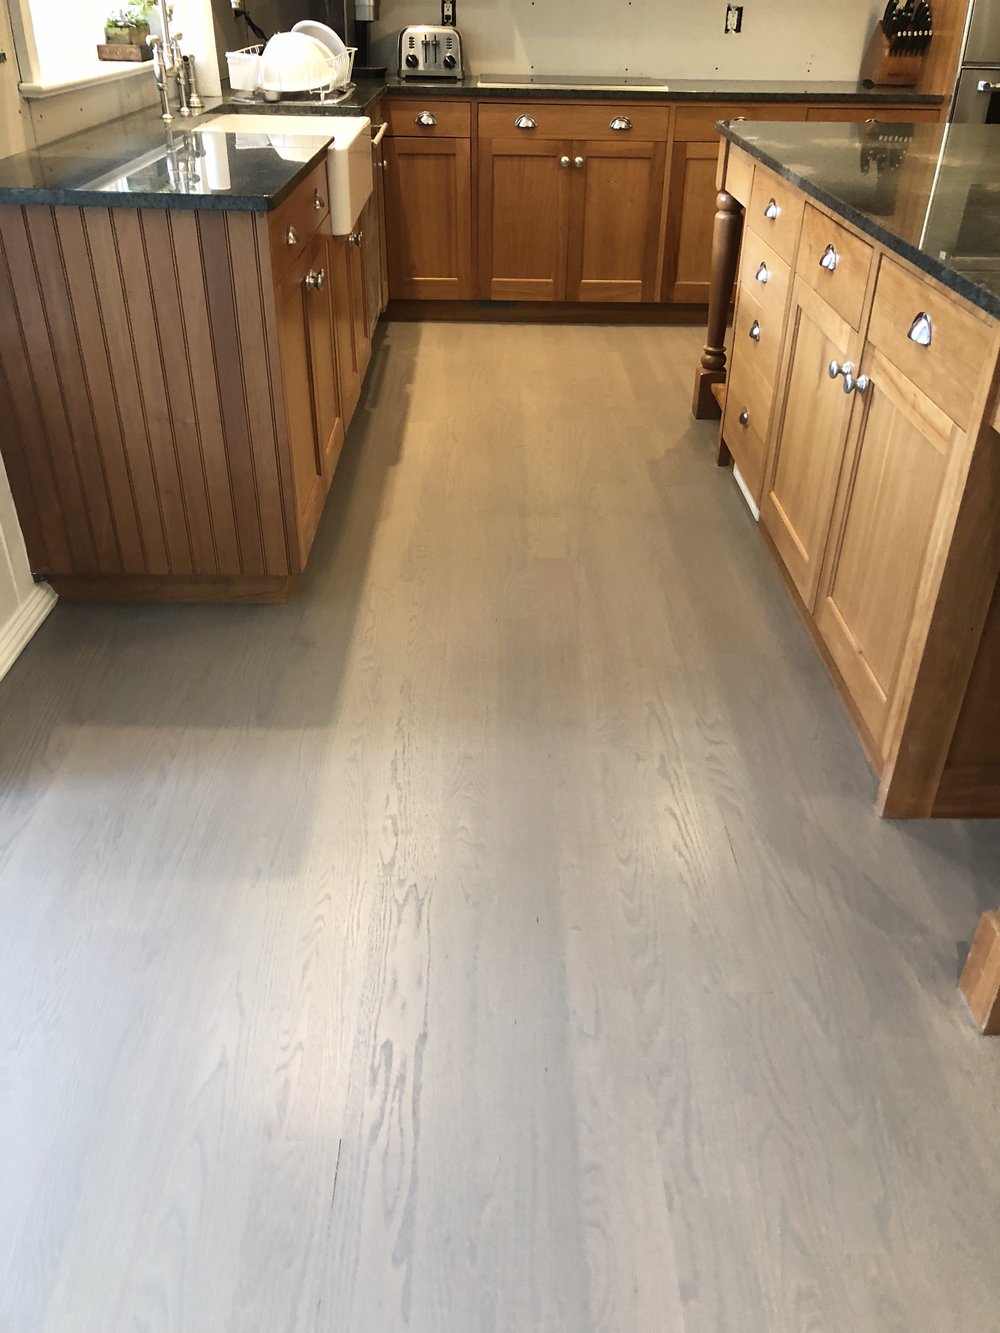 Gray Hardwood Floors, What Color Laminate Flooring With Oak Cabinets